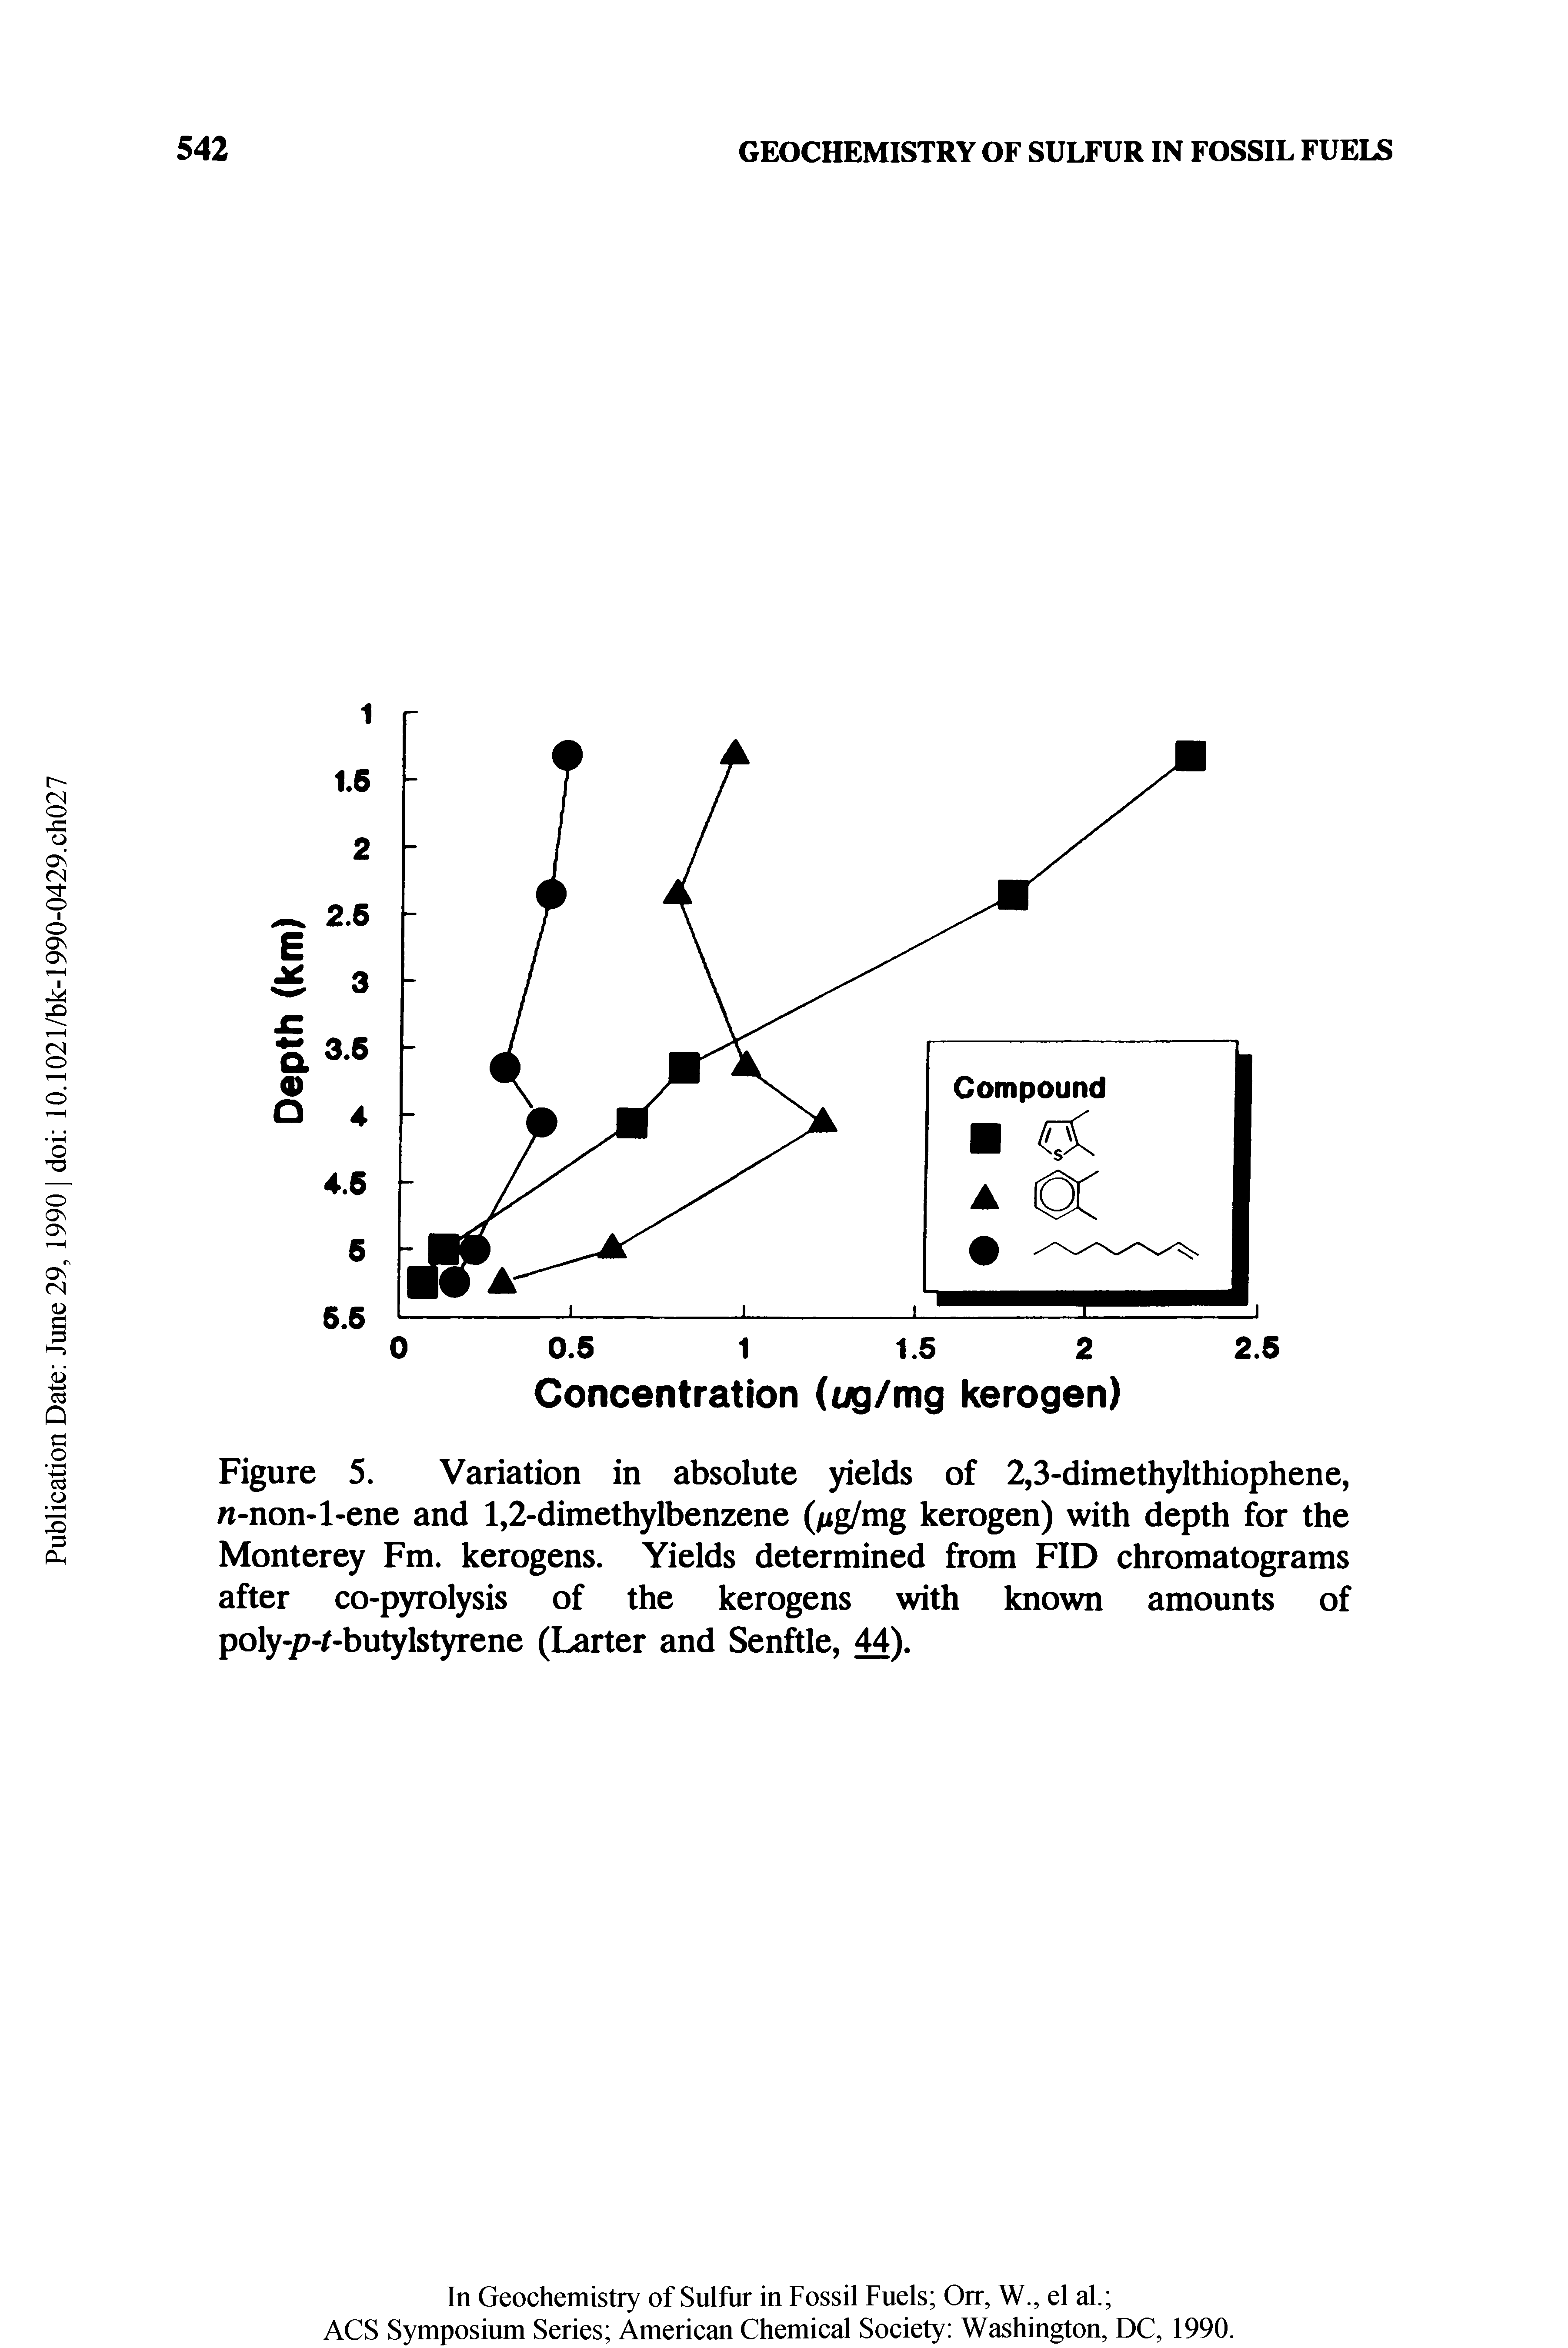 Figure 5. Variation in absolute yields of 2,3-dimethylthiophene, n-non-l-ene and 1,2-dimethylbenzene (/ig/mg kerogen) with depth for the Monterey Fm. kerogens. Yields determined from FID chromatograms after co-pyrolysis of the kerogens with known amounts of poly-/ -f-butylstyrene (Larter and Senftle, 44).